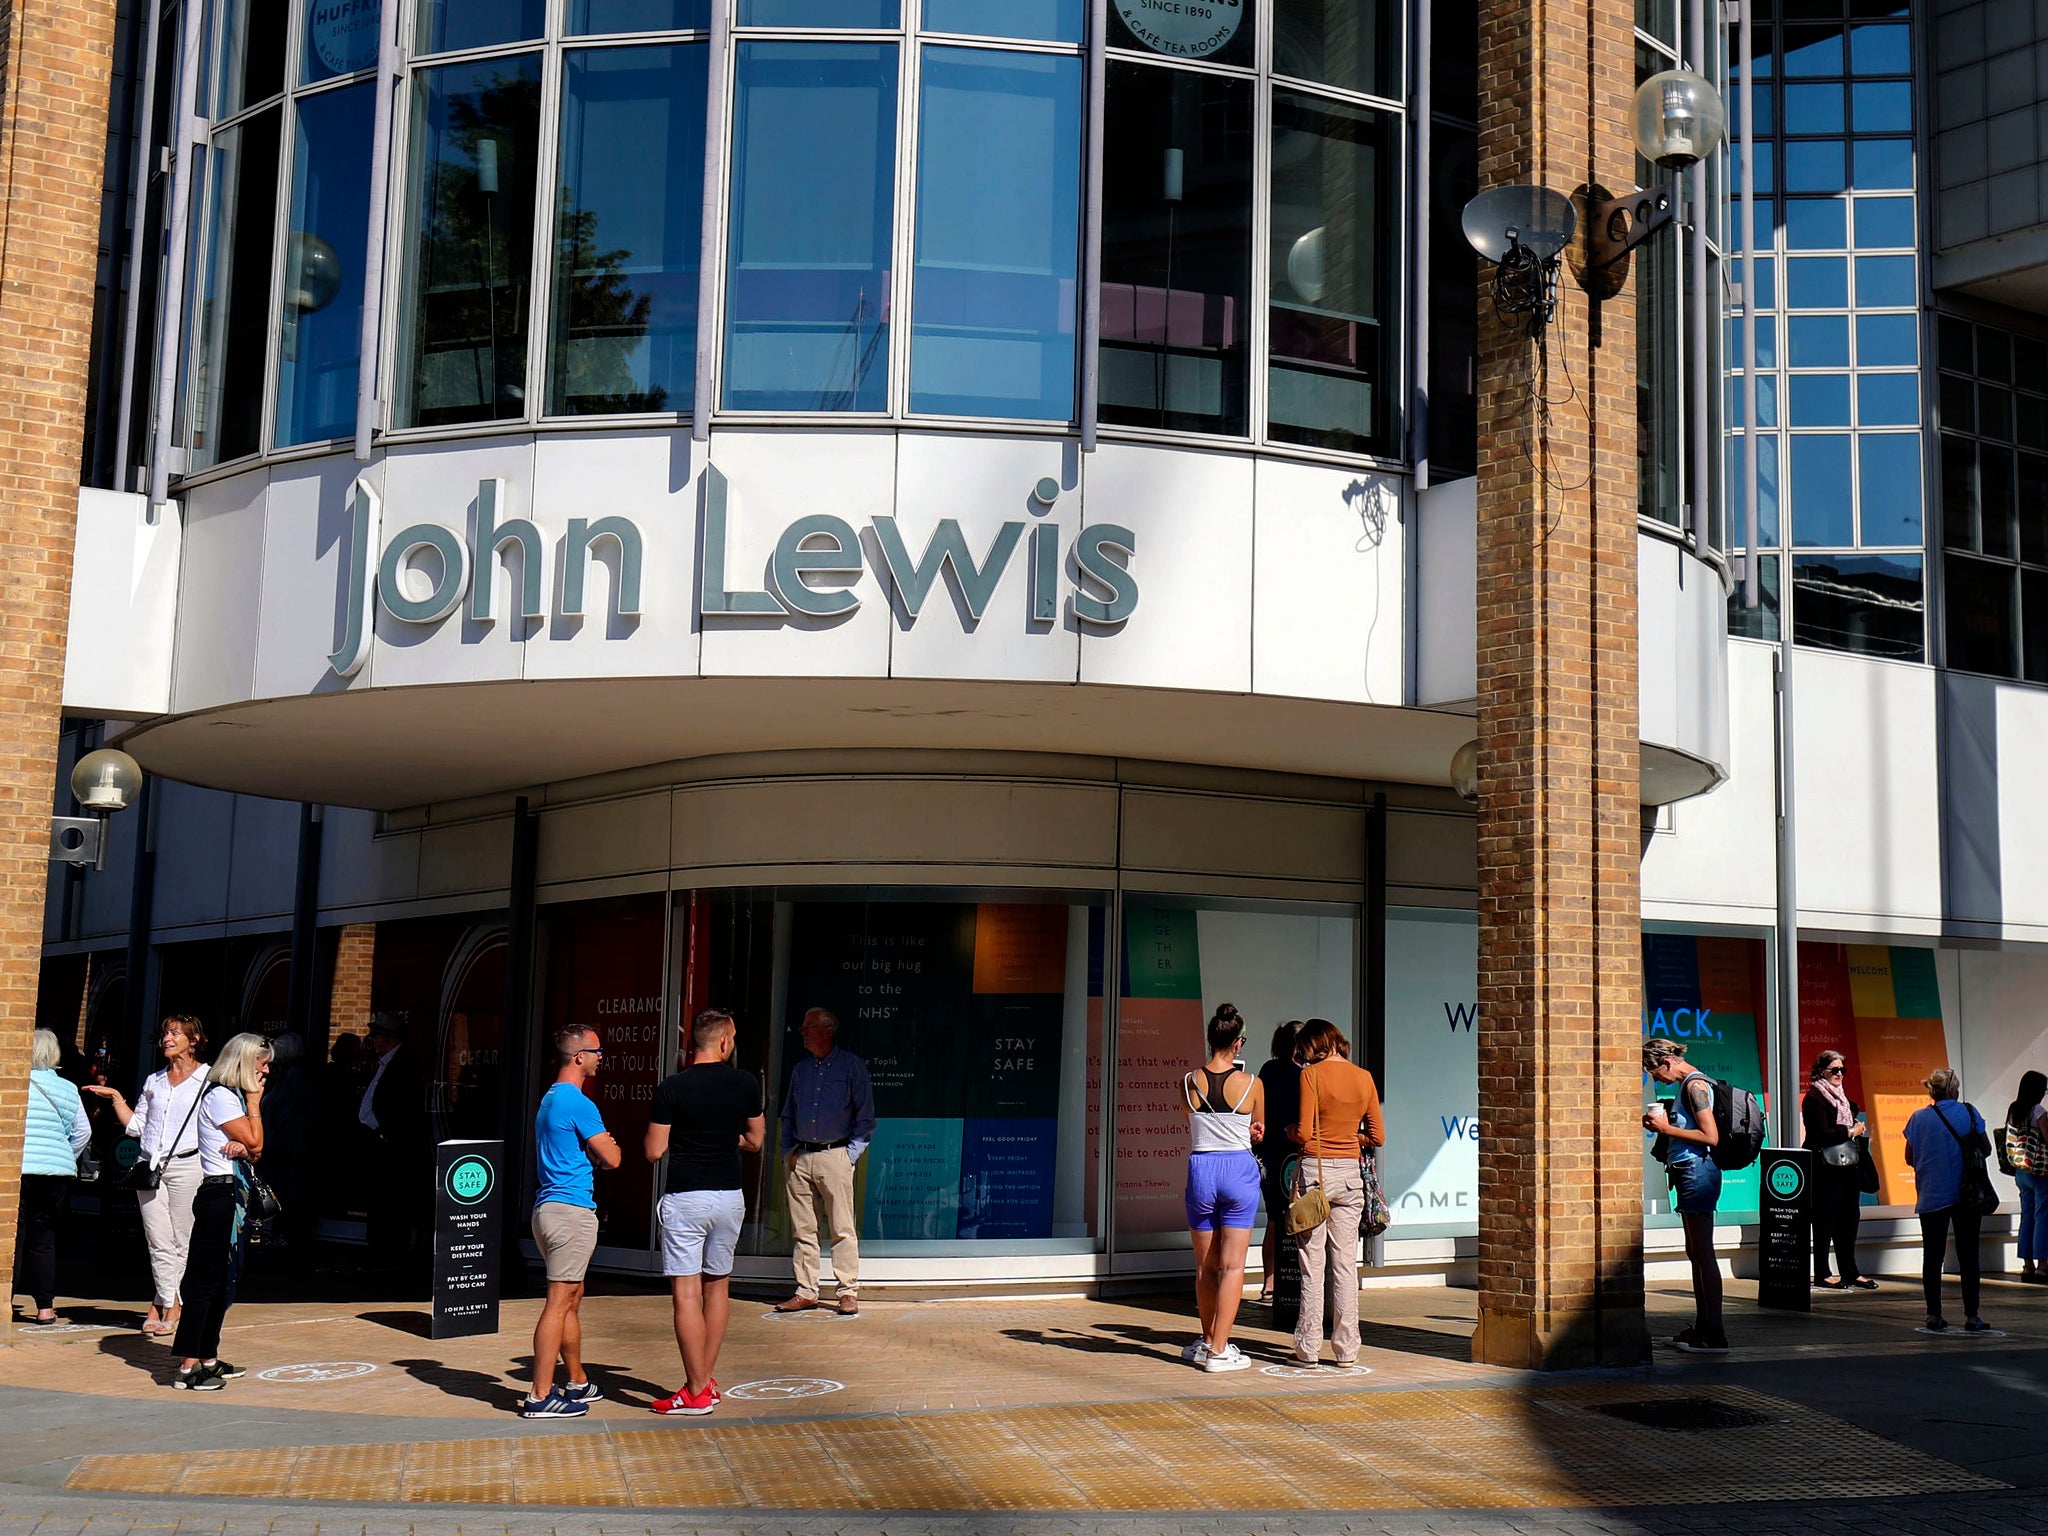 John Lewis is set to close more of its stores as it grapples with the impact of the pandemic